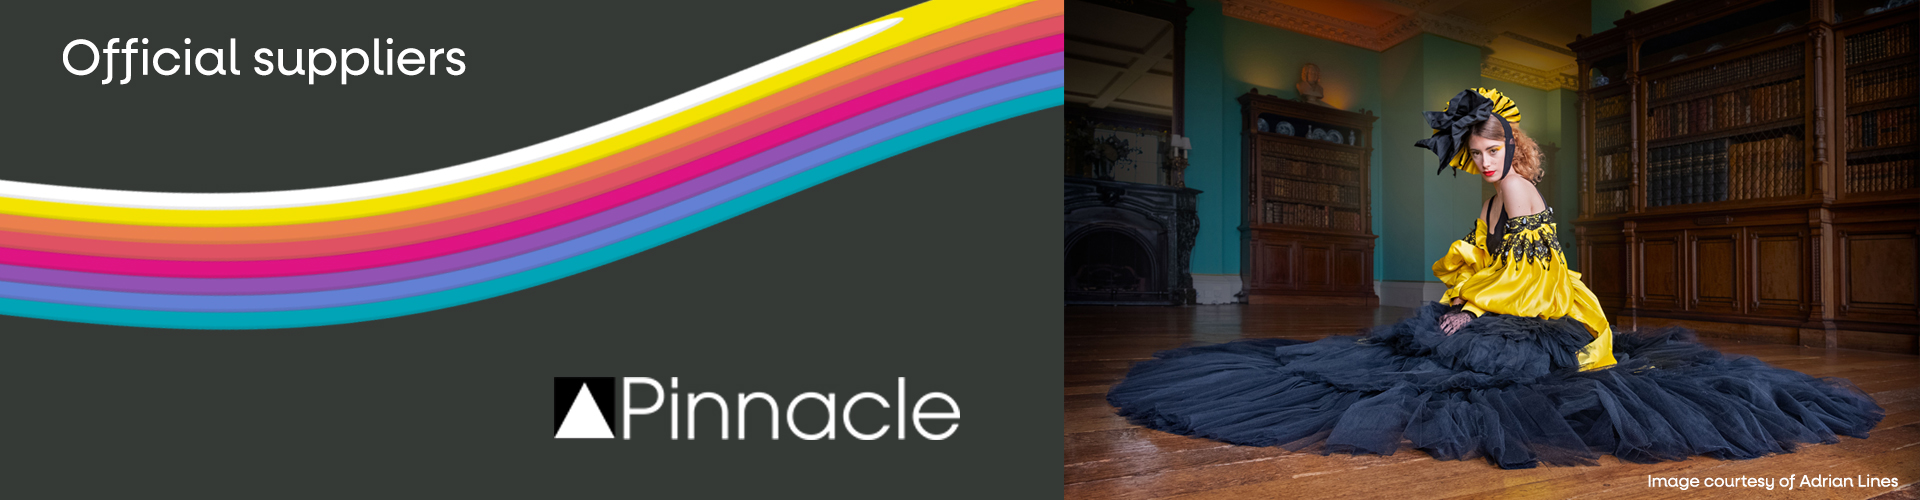 Official Suppliers of Pinnacle Papers